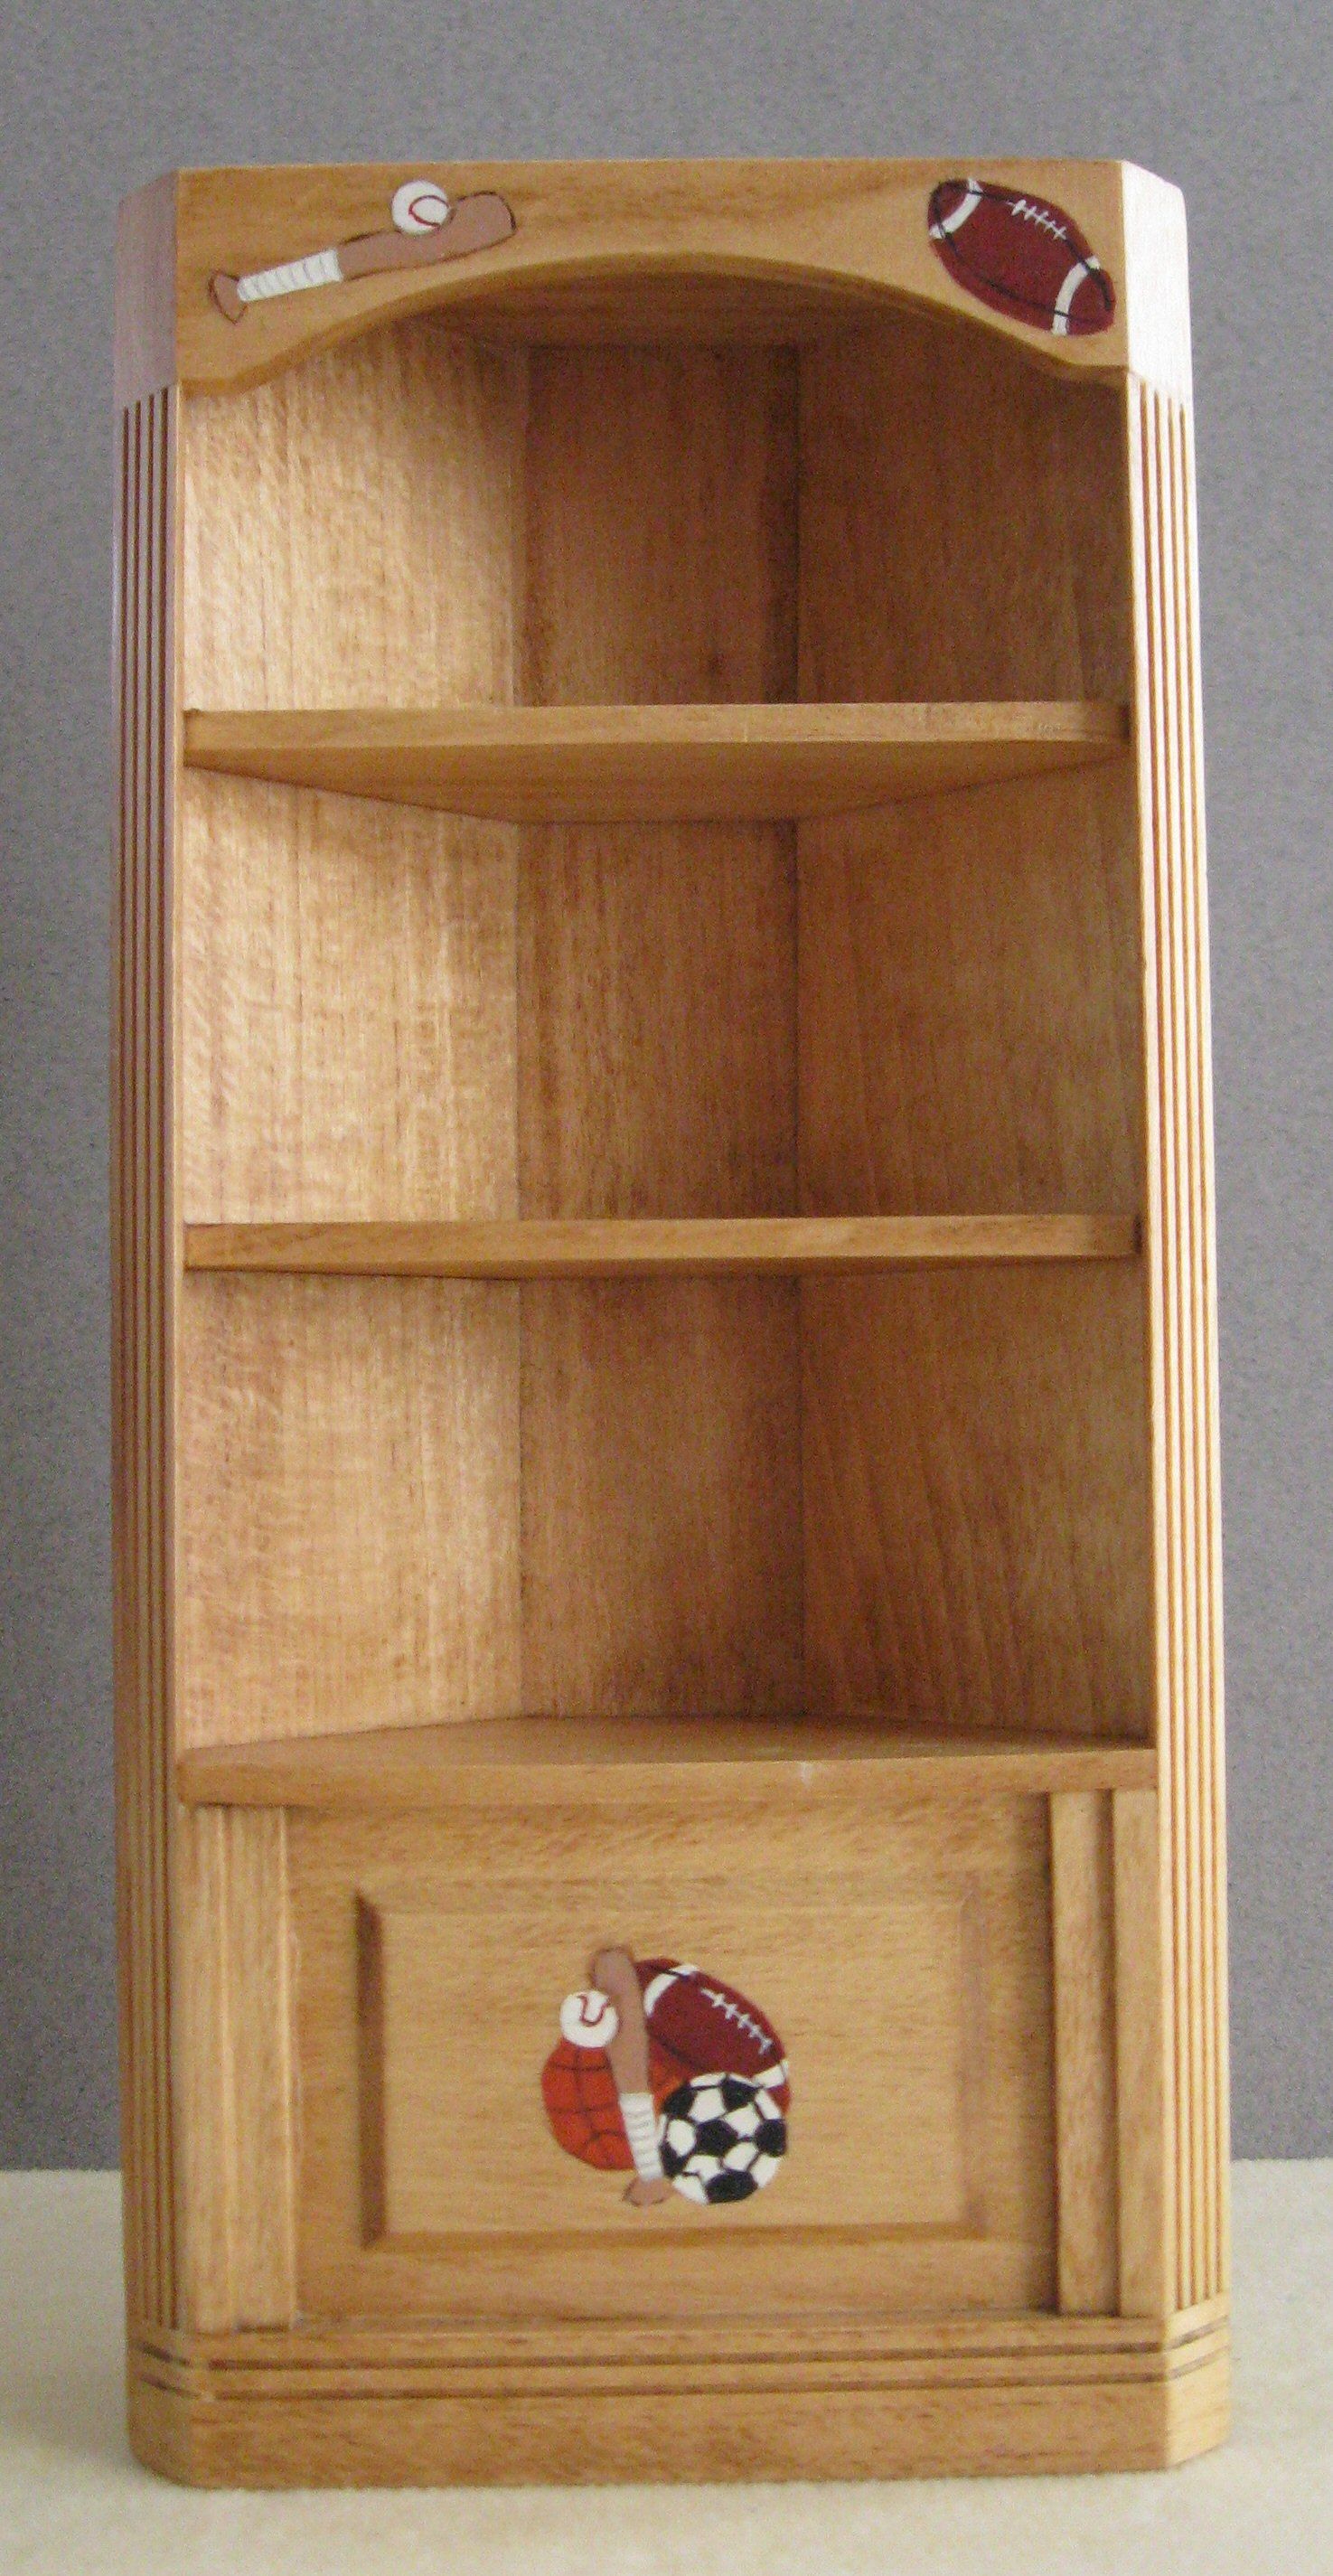 Bookcasecorner Handpainted On Oak 2600 Acd Miniatures Intended For Corner Oak Bookcase (View 4 of 15)